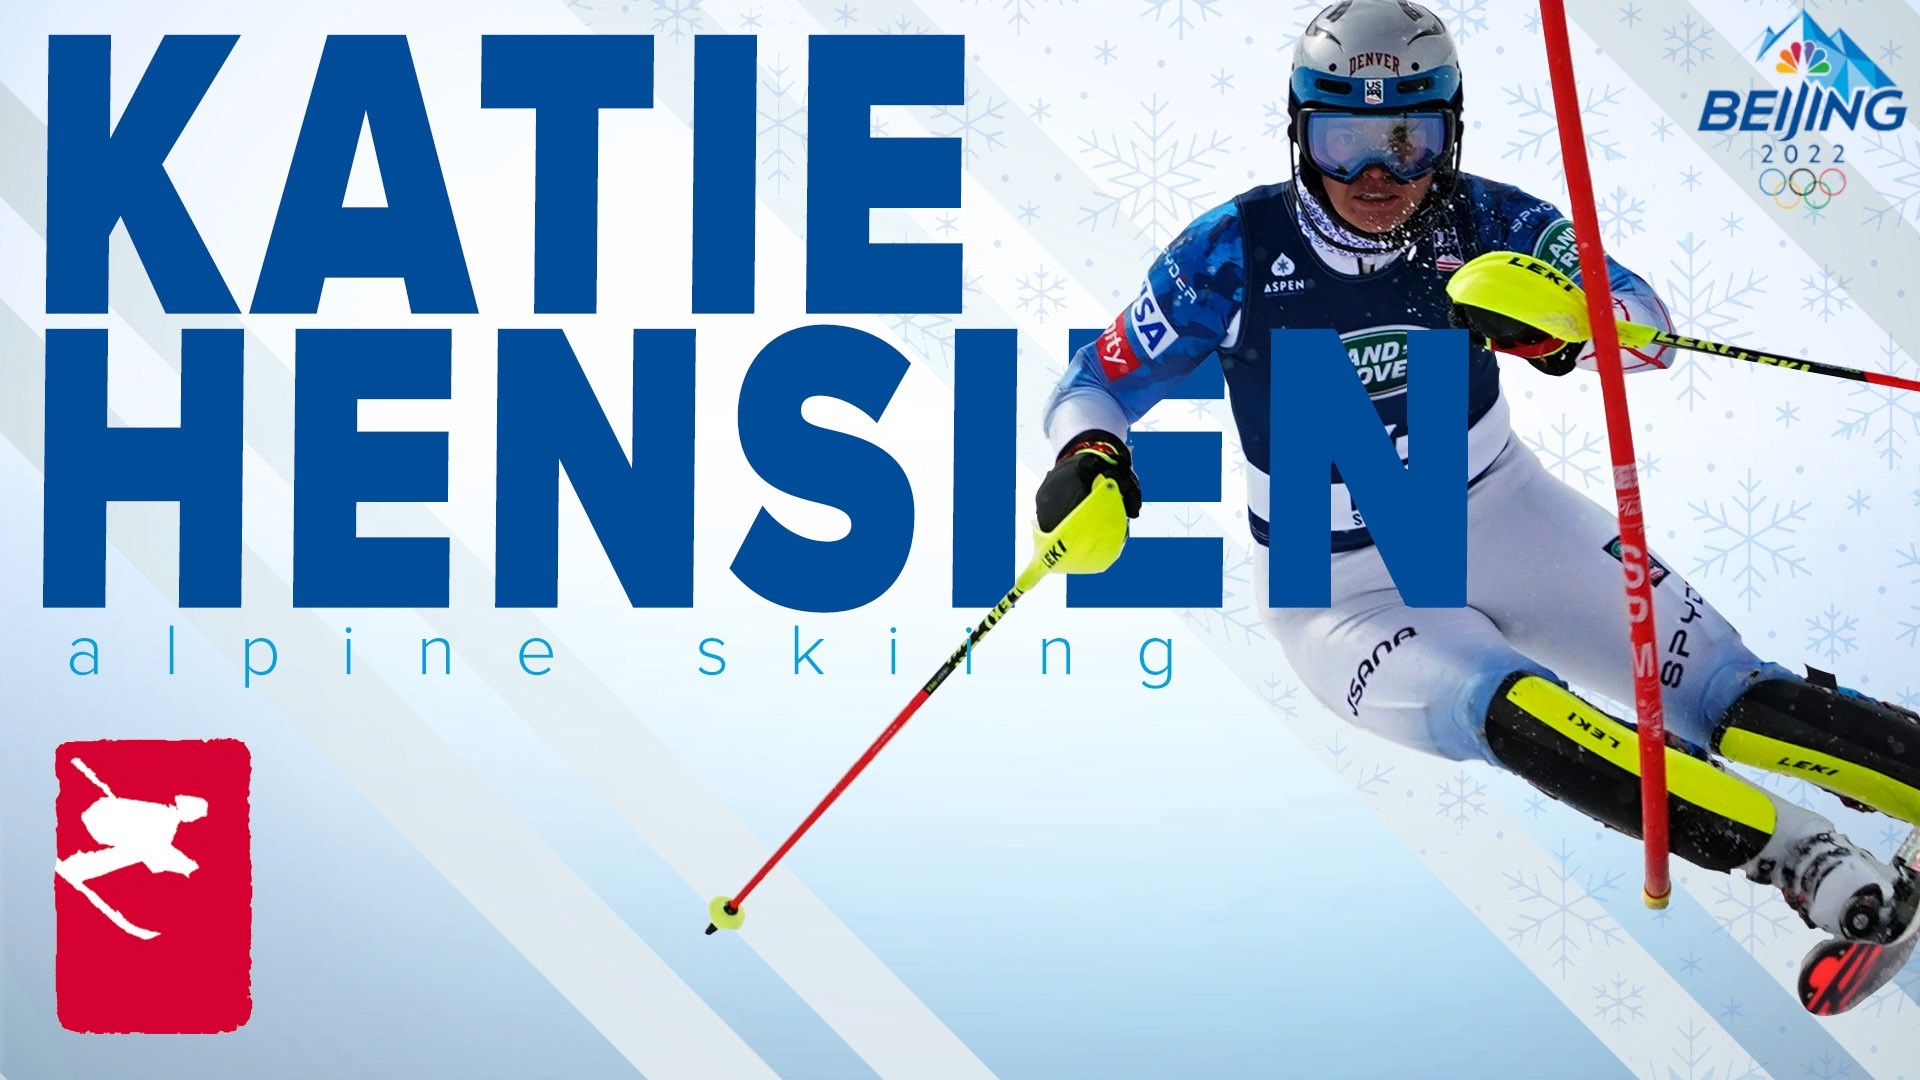 Alpine skier Katie Hensien is a double major in computer science and business, but right now her goal is to make her mark at the 2022 Winter Olympics.